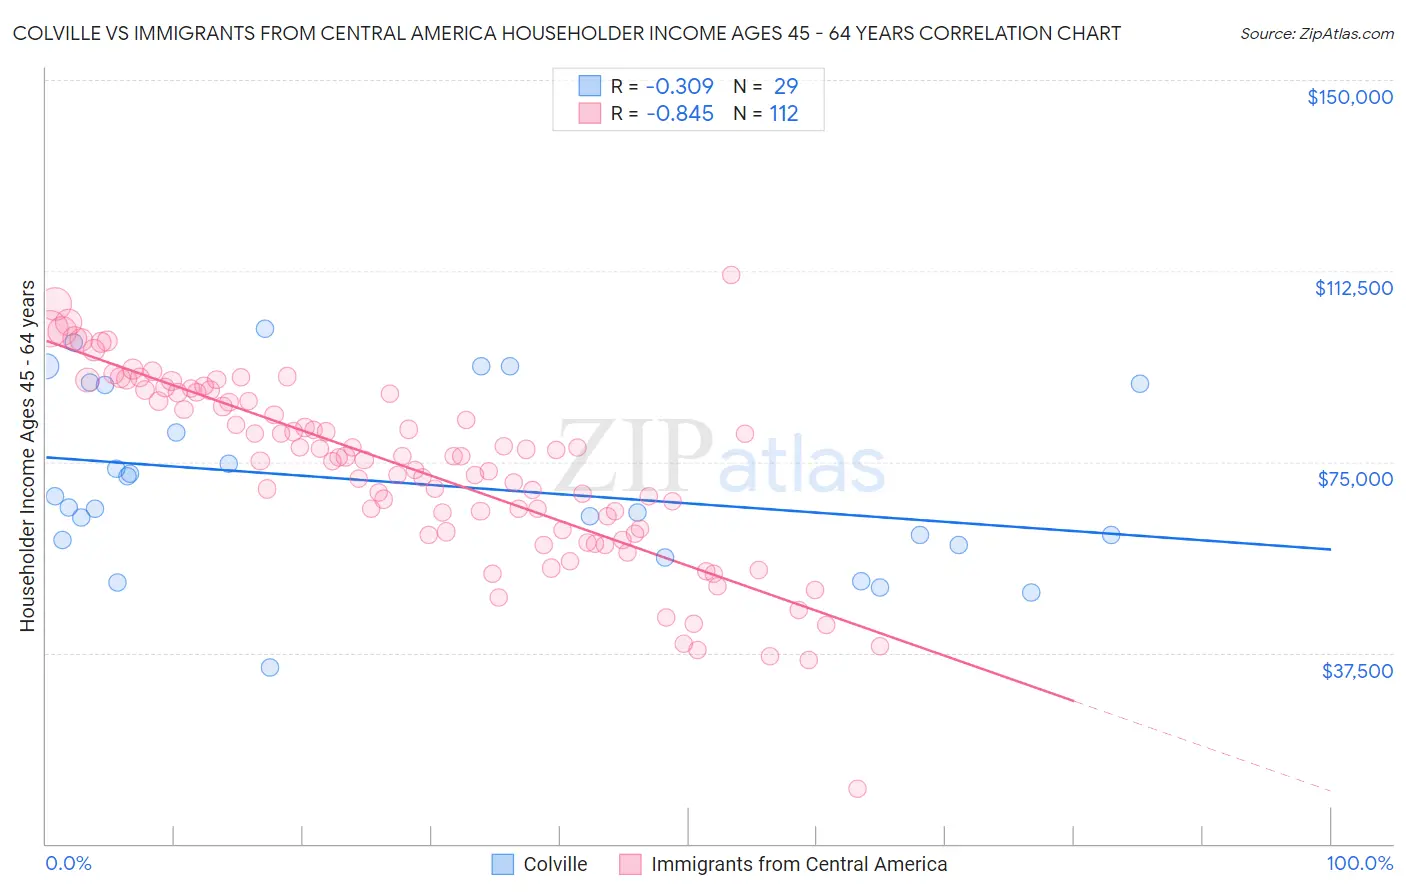 Colville vs Immigrants from Central America Householder Income Ages 45 - 64 years